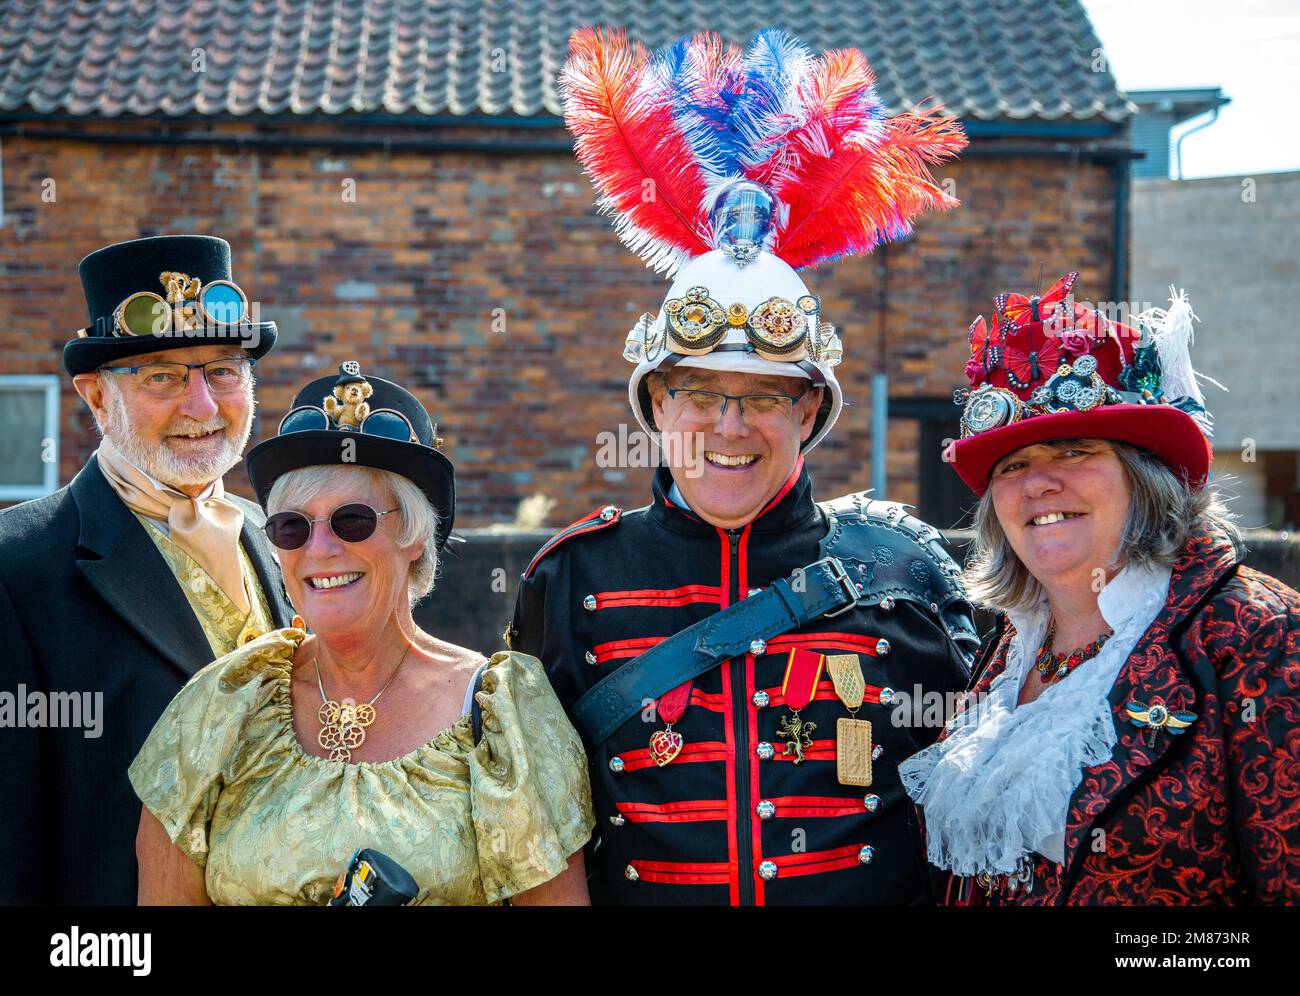 Portrait of a middle aged group of steampunks wearing period and military Steampunk clothing. Smiling, laughing and looking directly into camera. Stock Photo